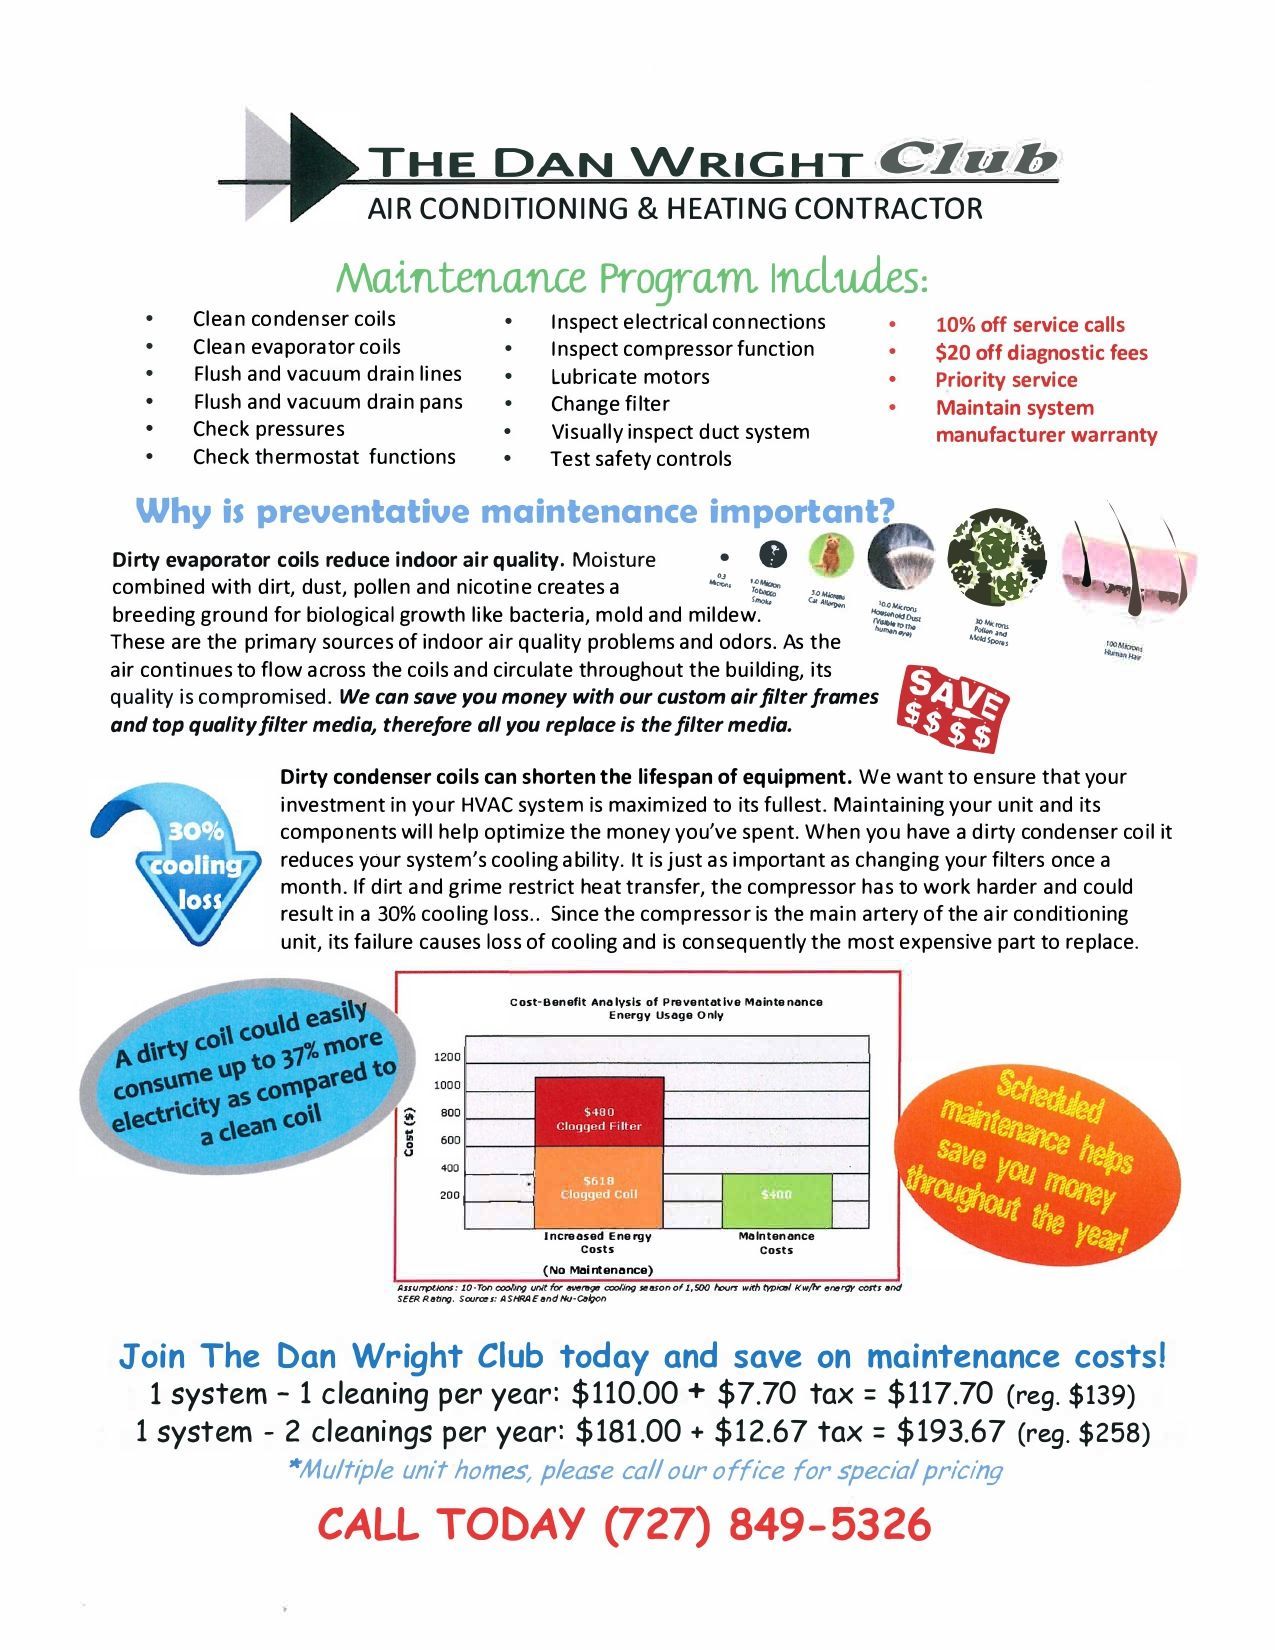 Air Conditioning And Heating Contractor Flyer – New Port Richey, FL – The Dan Wright Corp.